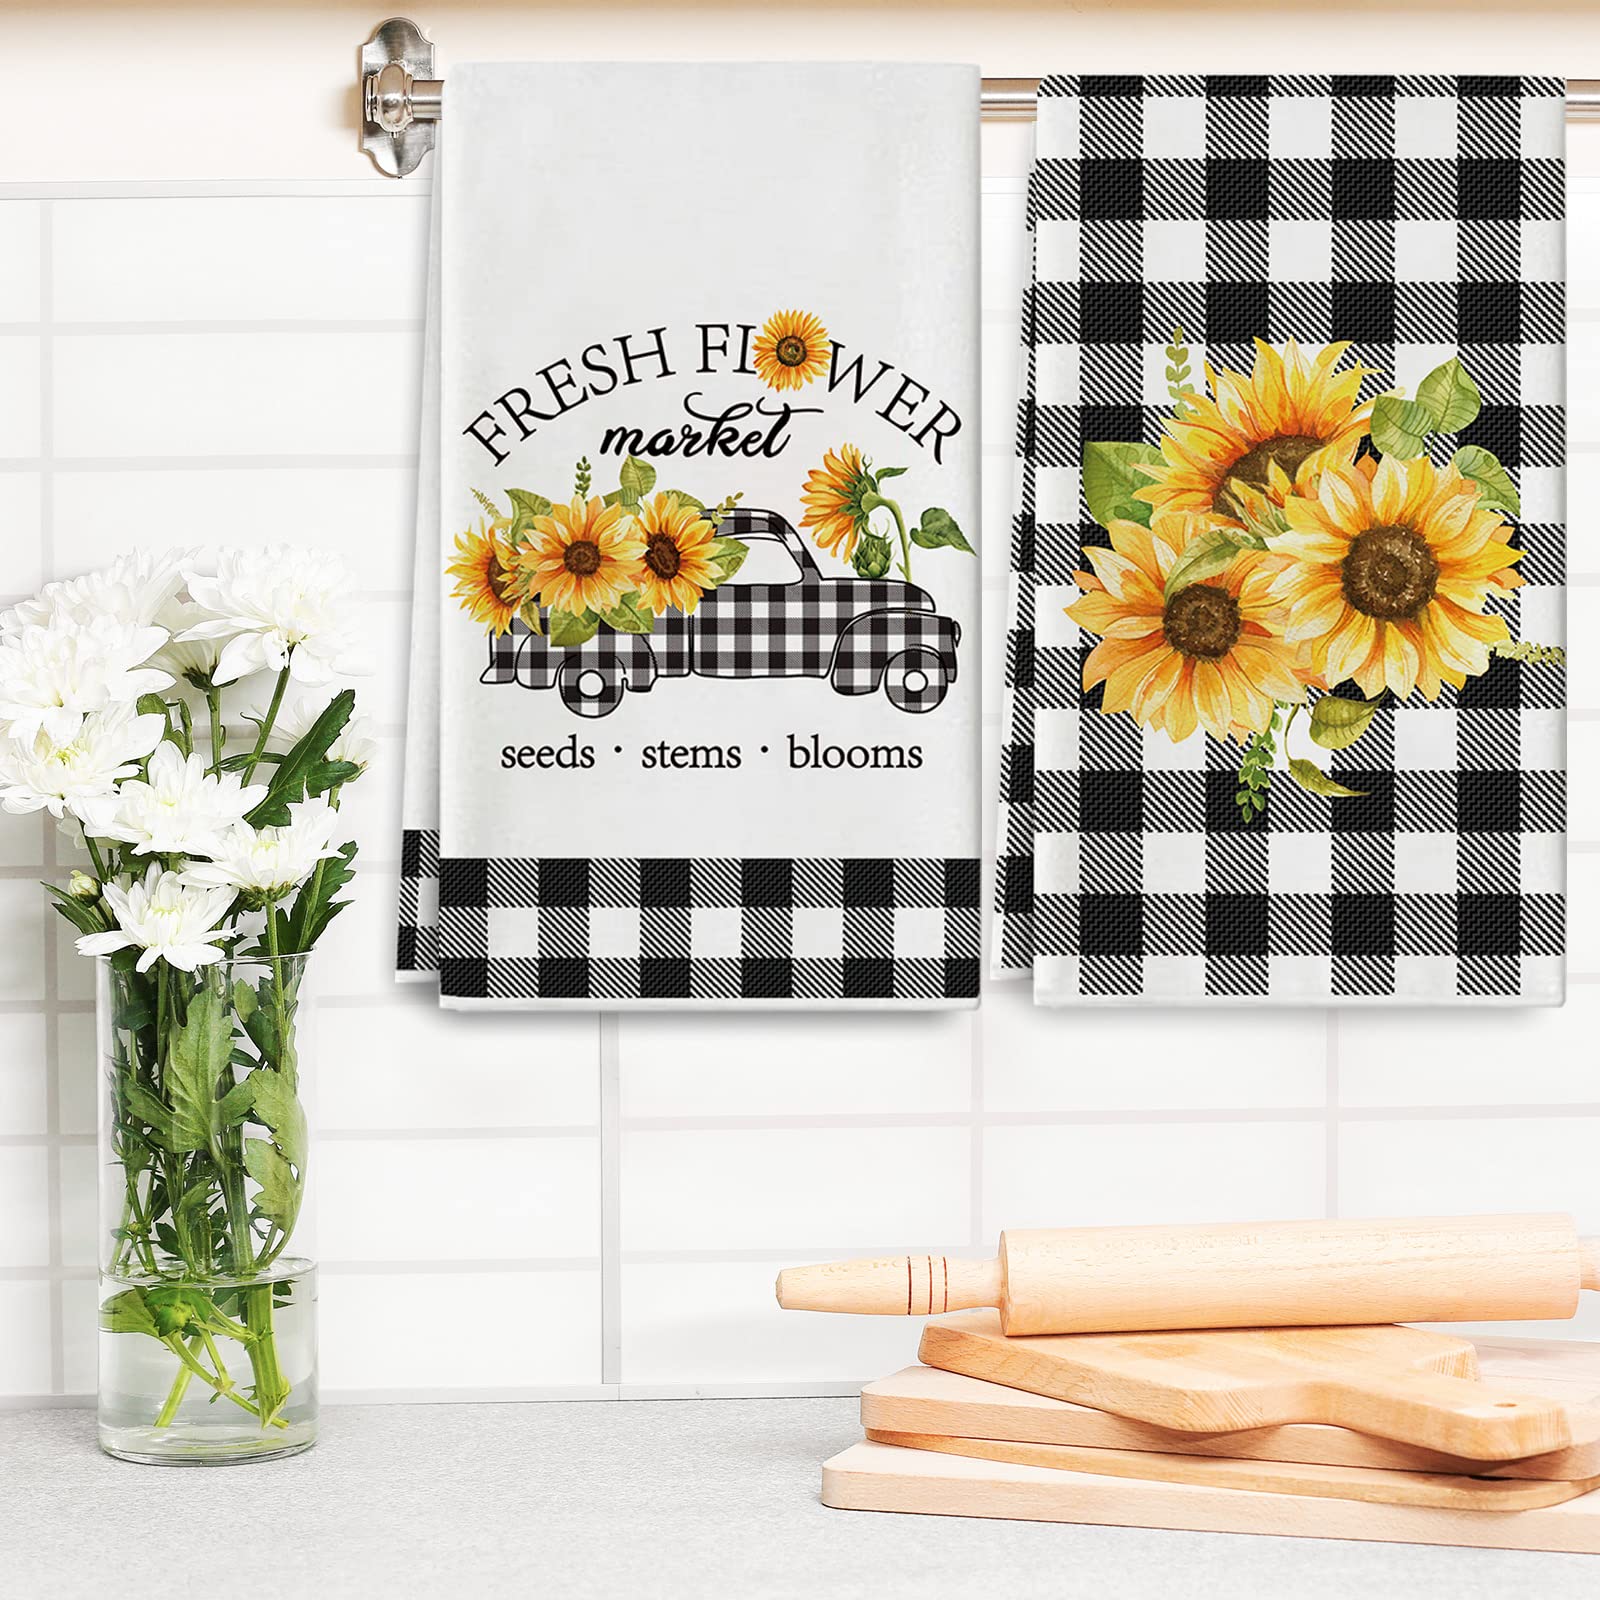 AnyDesign Sunflower Kitchen Towel Spring Summer Flower Dish Towel 18 x 28 Inch Buffalo Plaids Floral Hand Drying Tea Towel for Seasonal Cooking Baking Cleaning Wiping Supplies, Set of 4